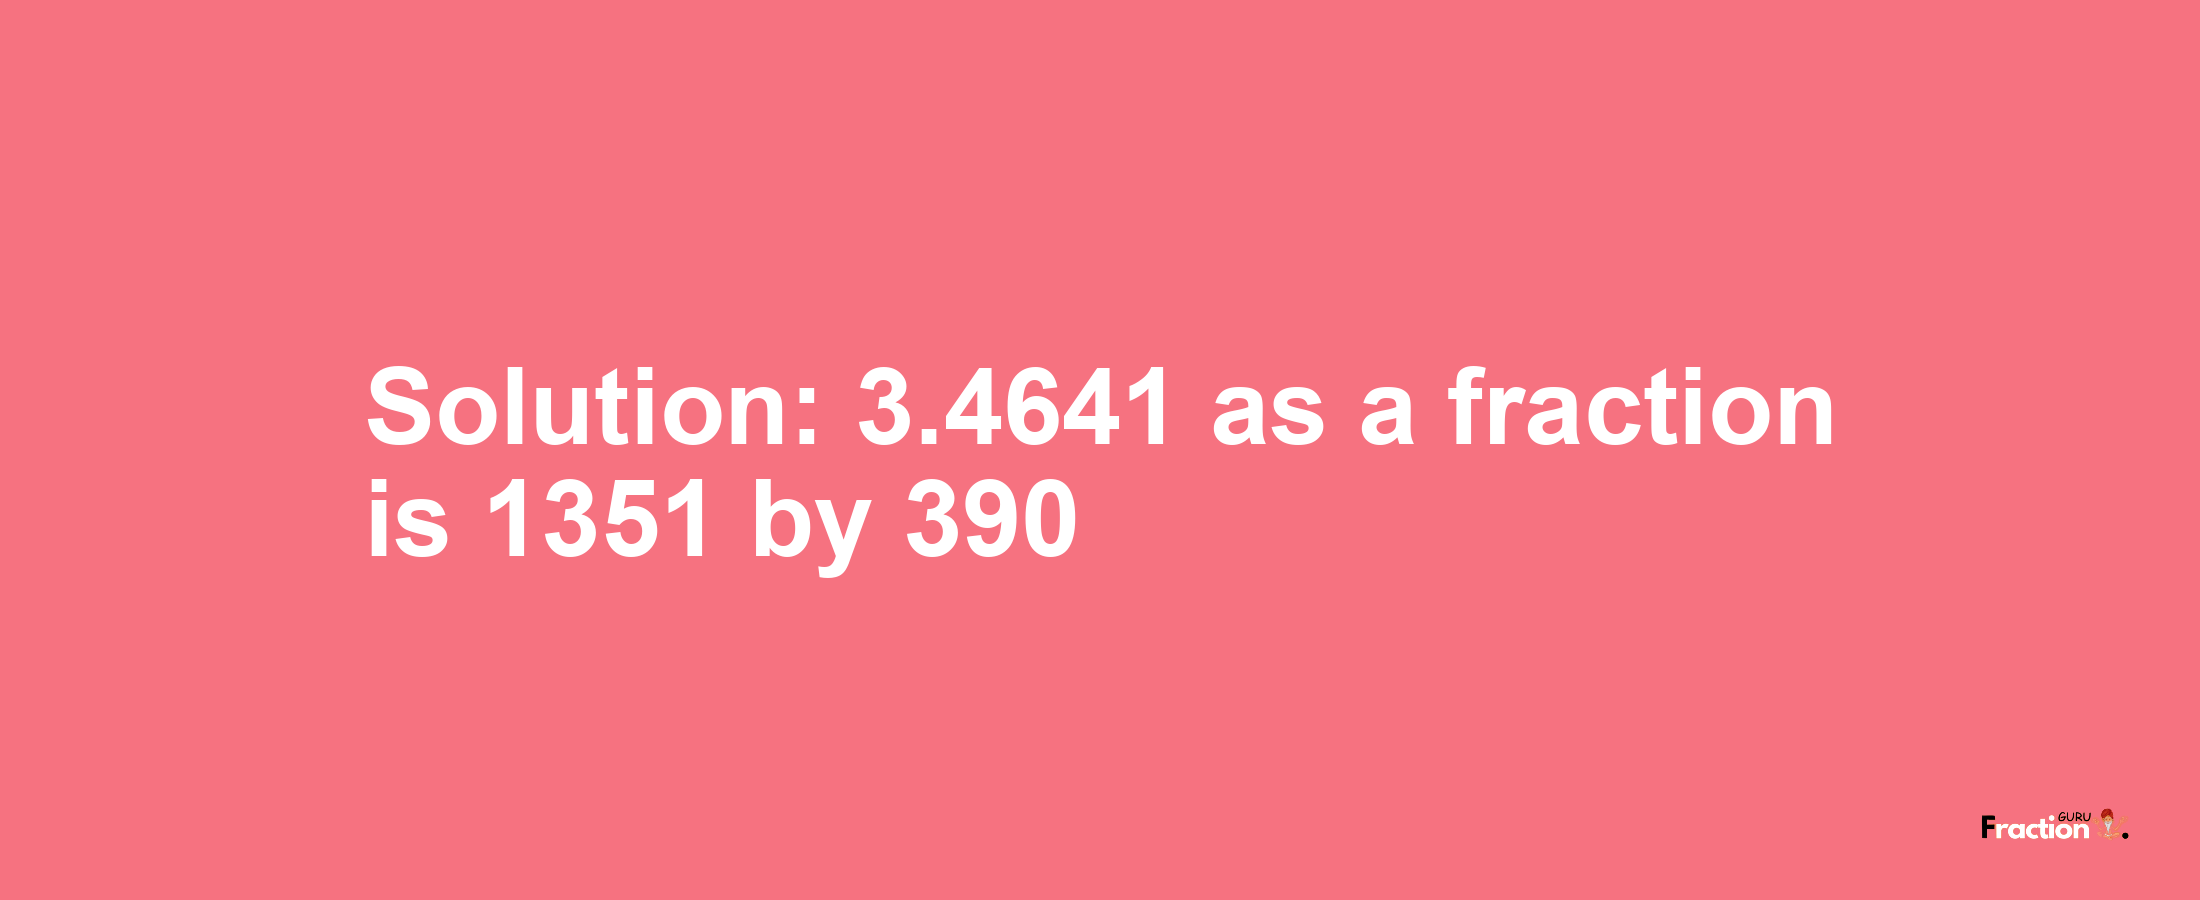 Solution:3.4641 as a fraction is 1351/390